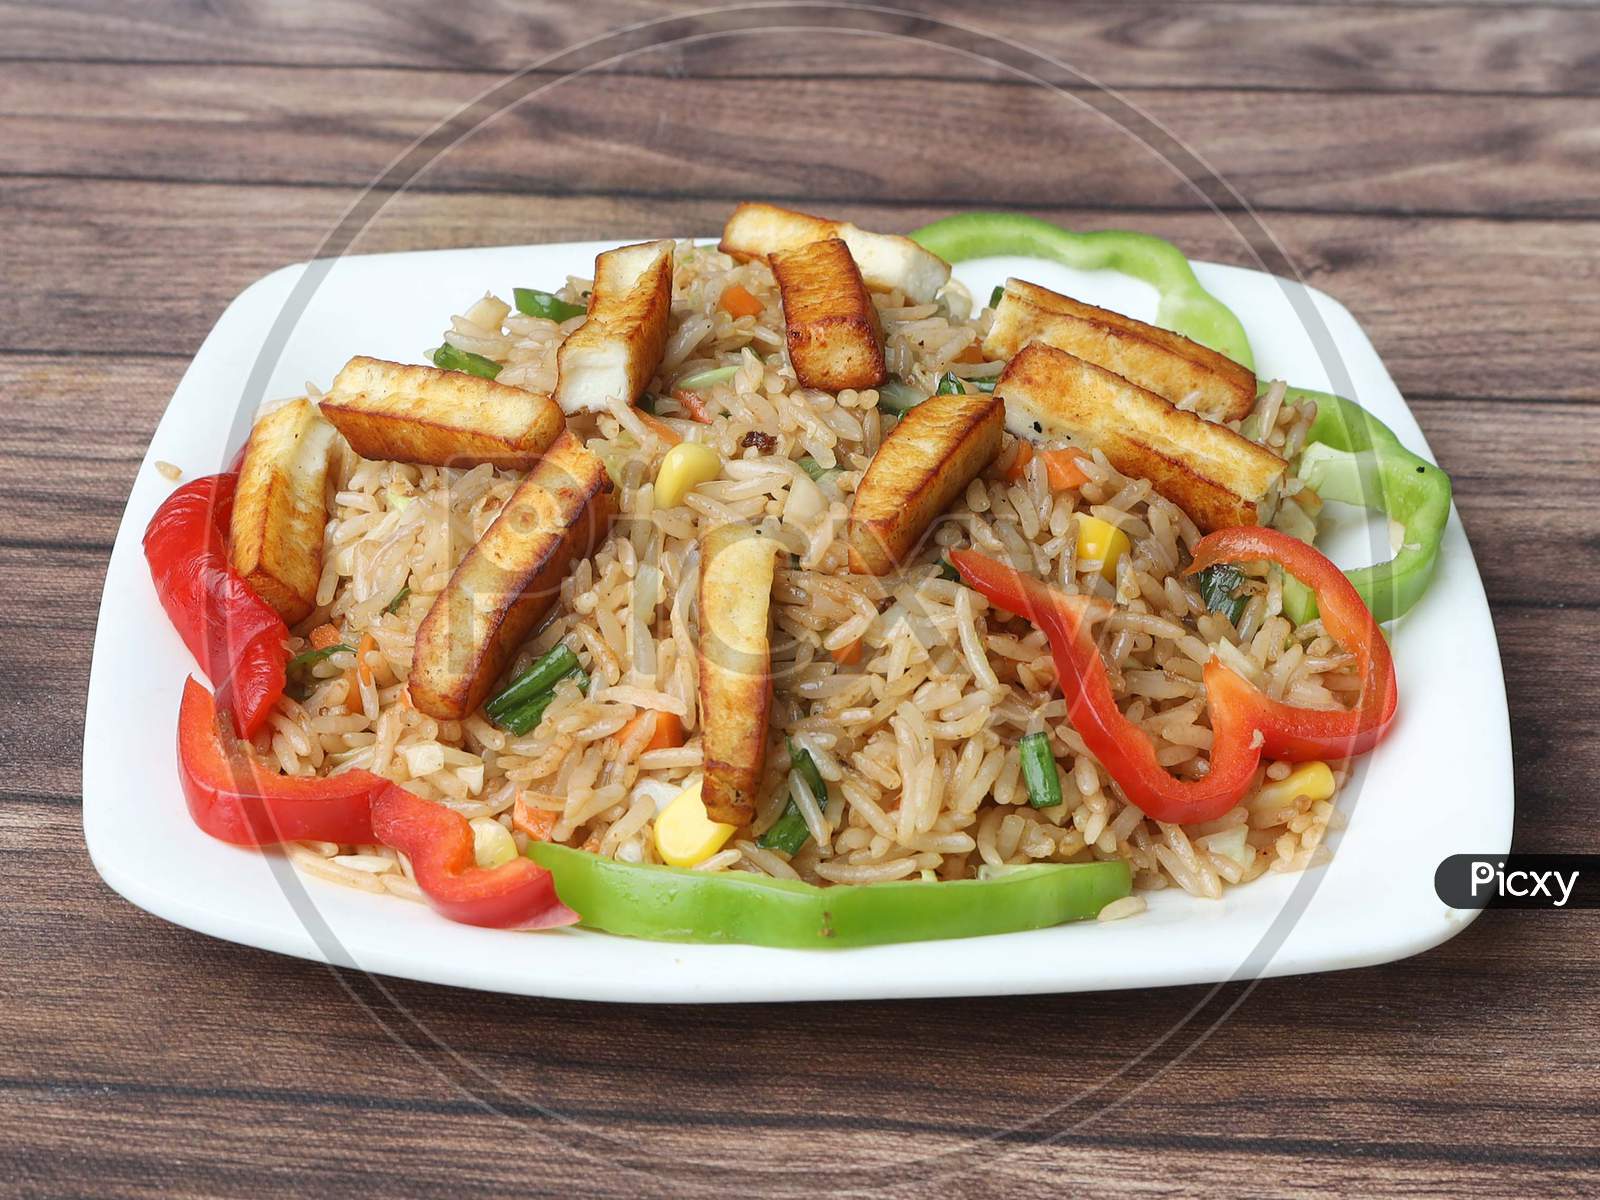 Healthy And Tasty Paneer Fried Rice Made Of Rice, Mixed Veggies And Paneer, Served In Bowl Over A Rustic Wooden Background, Indo Chinese, Indian Cuisine, Selective Focus